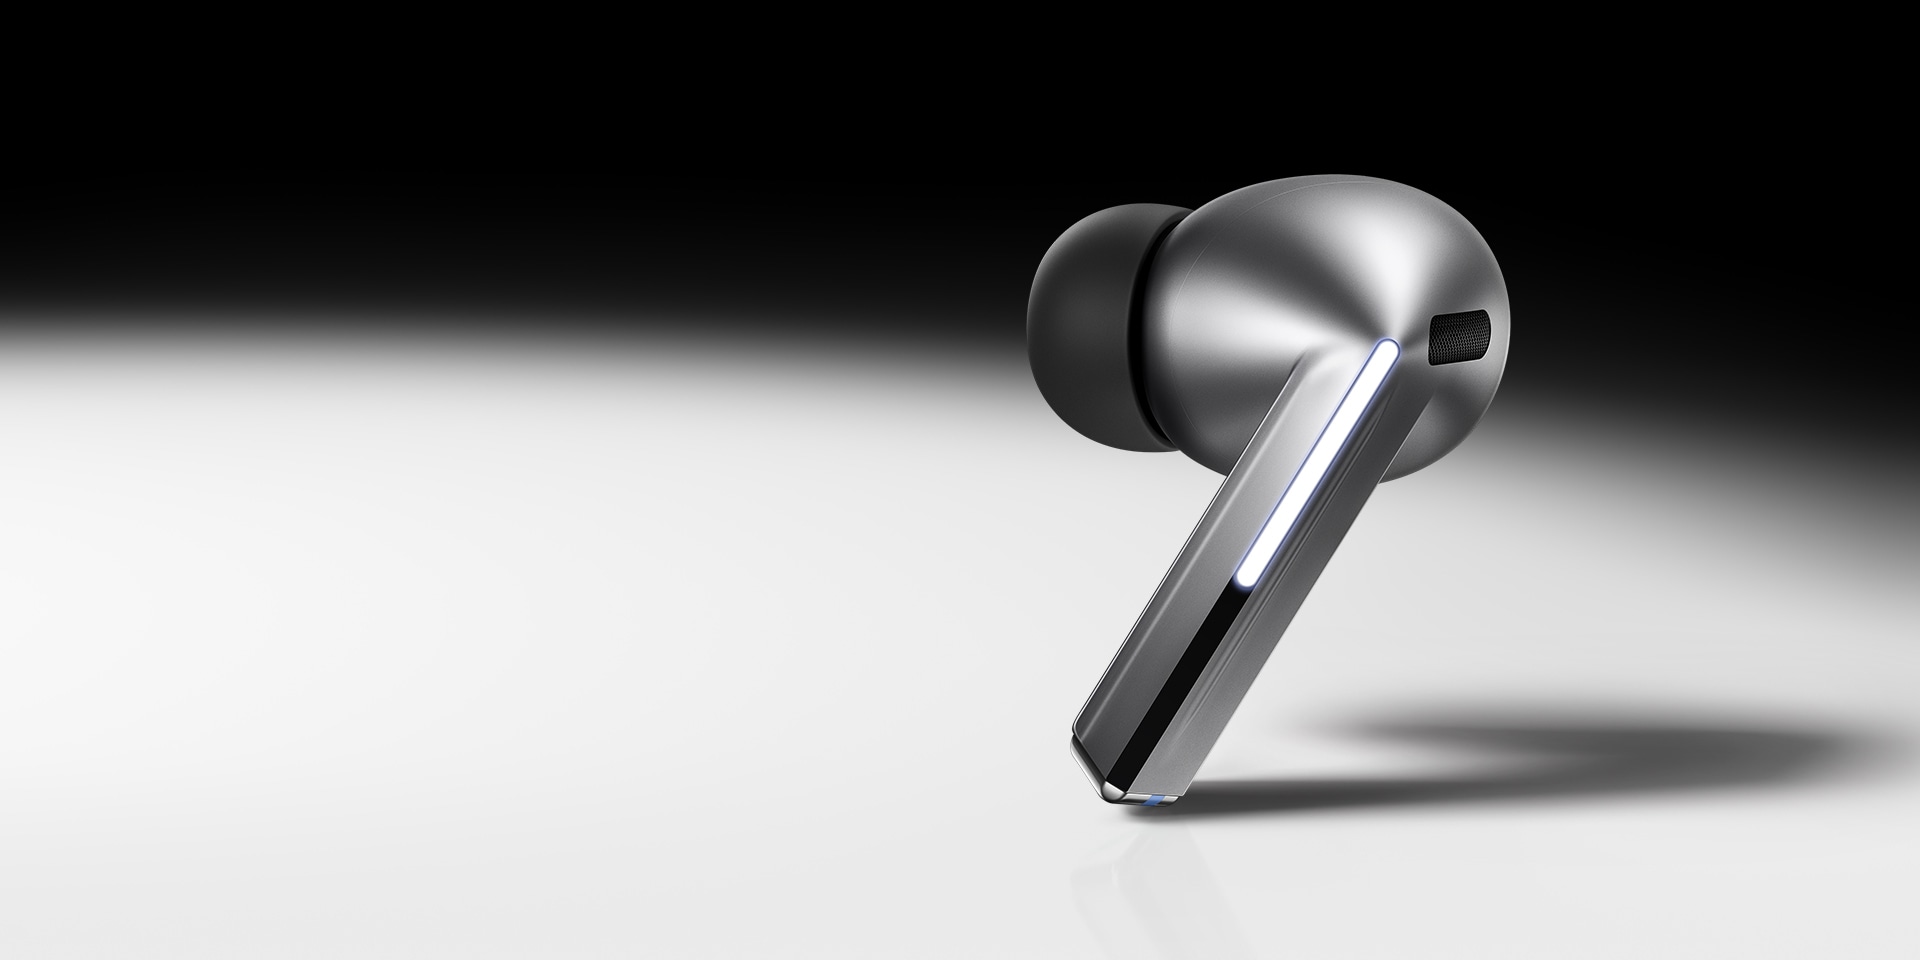 A single, silver coloured Galaxy Buds3 Pro earbud on a black and white gradient background.